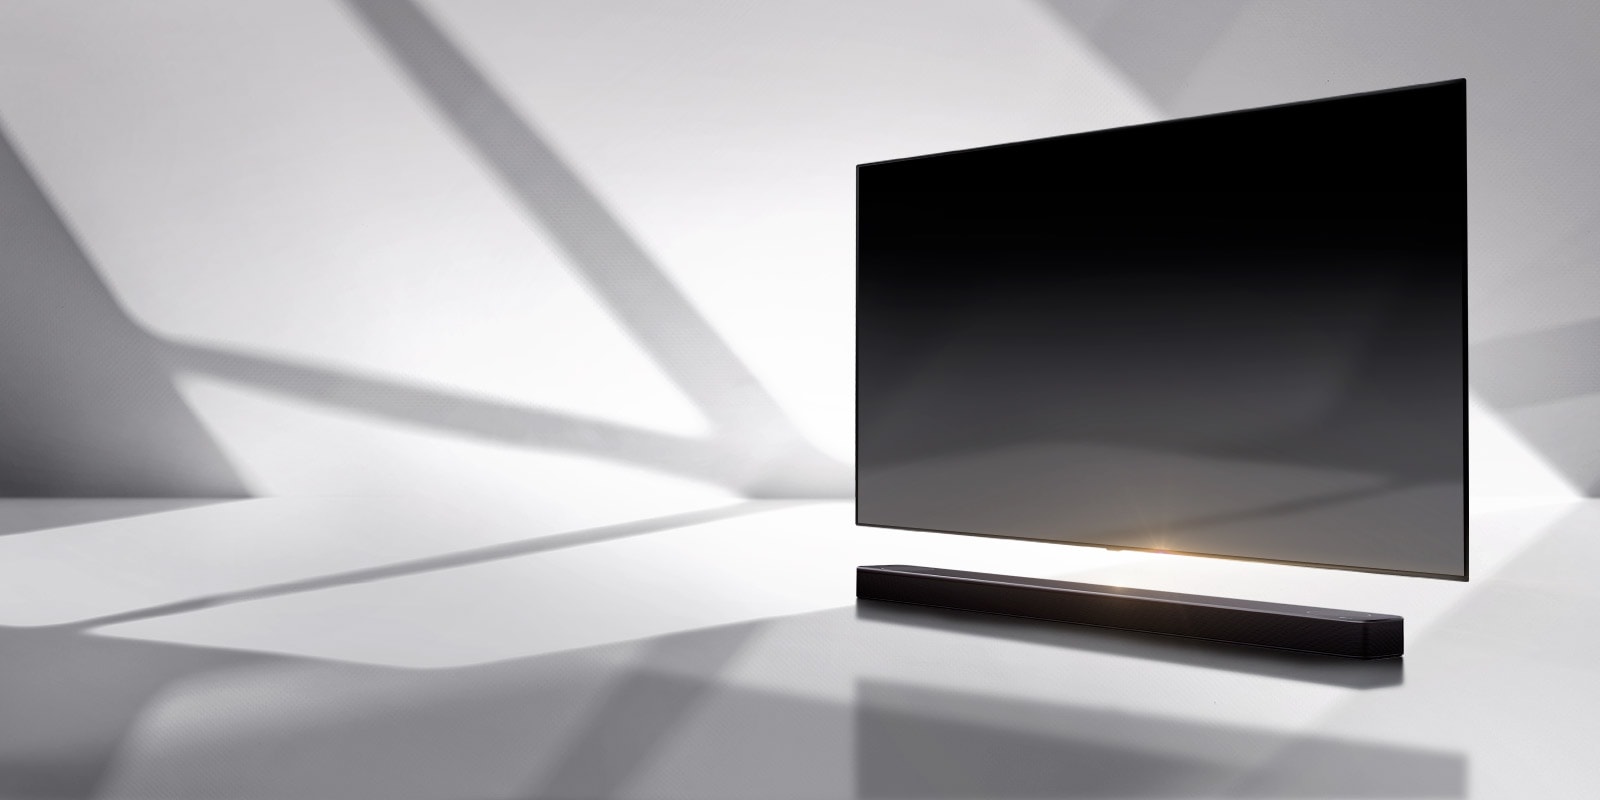 A soundbar and a TV are placed on a white floor and there is a shadow coming from outside right behind.